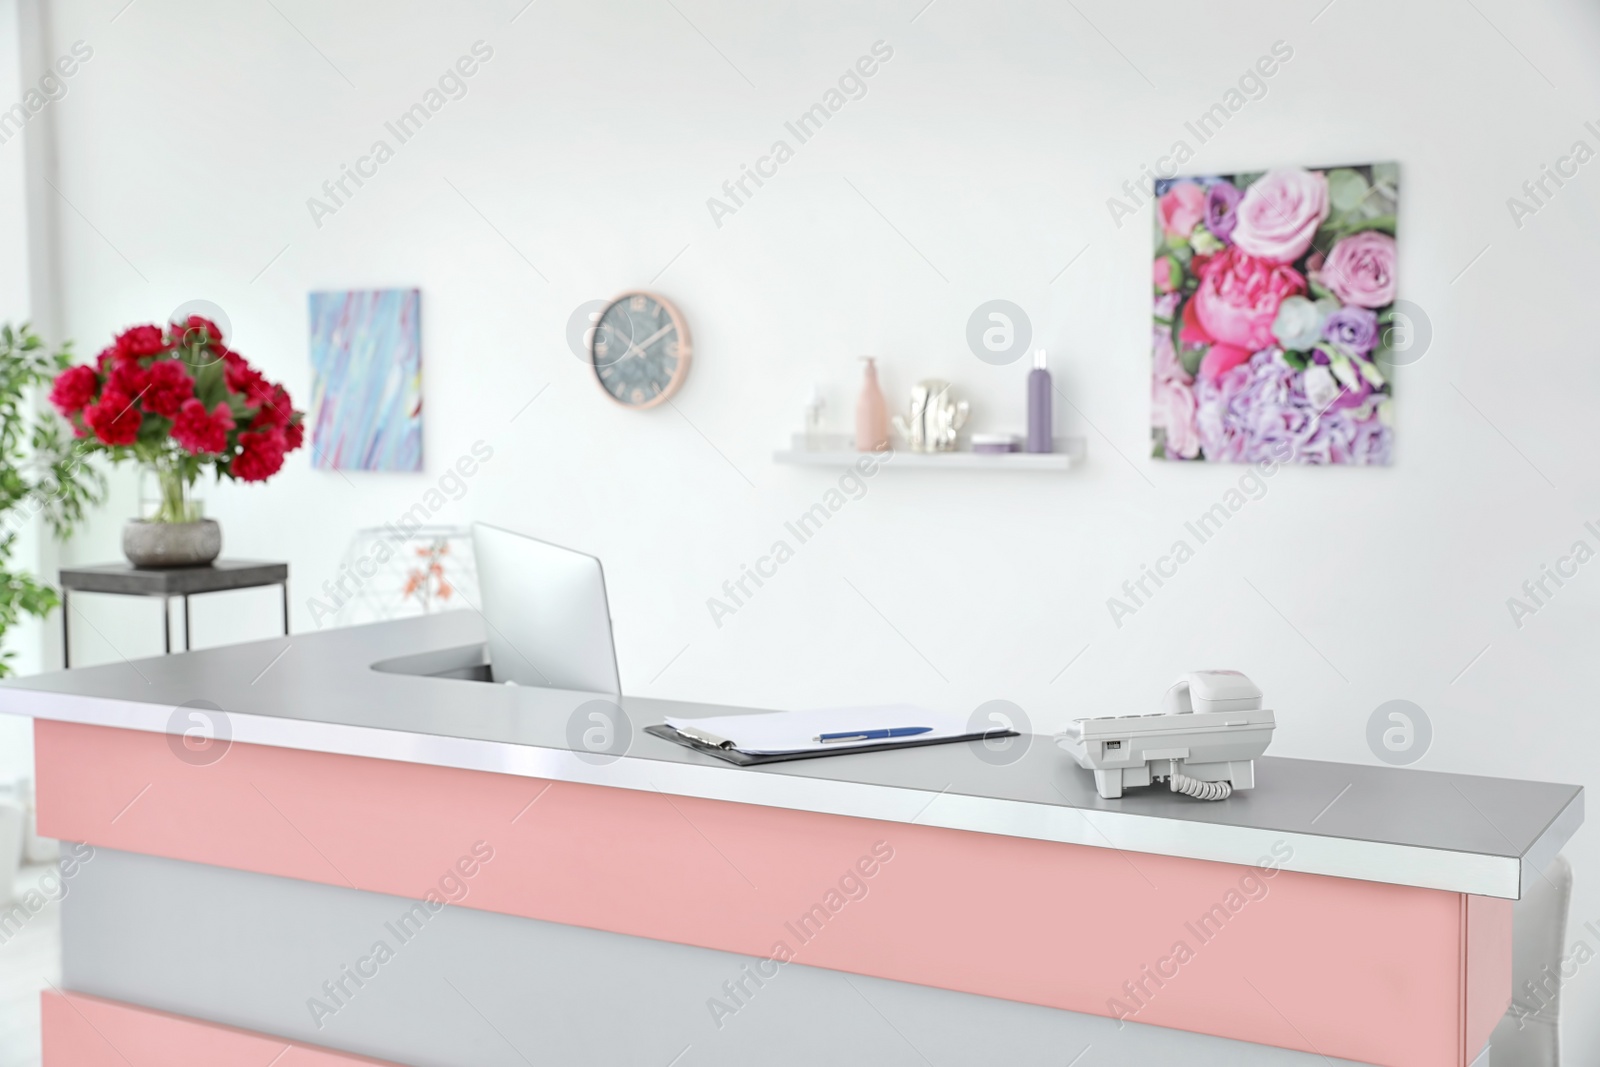 Photo of Beauty salon interior with computer on desk. Receptionist workplace